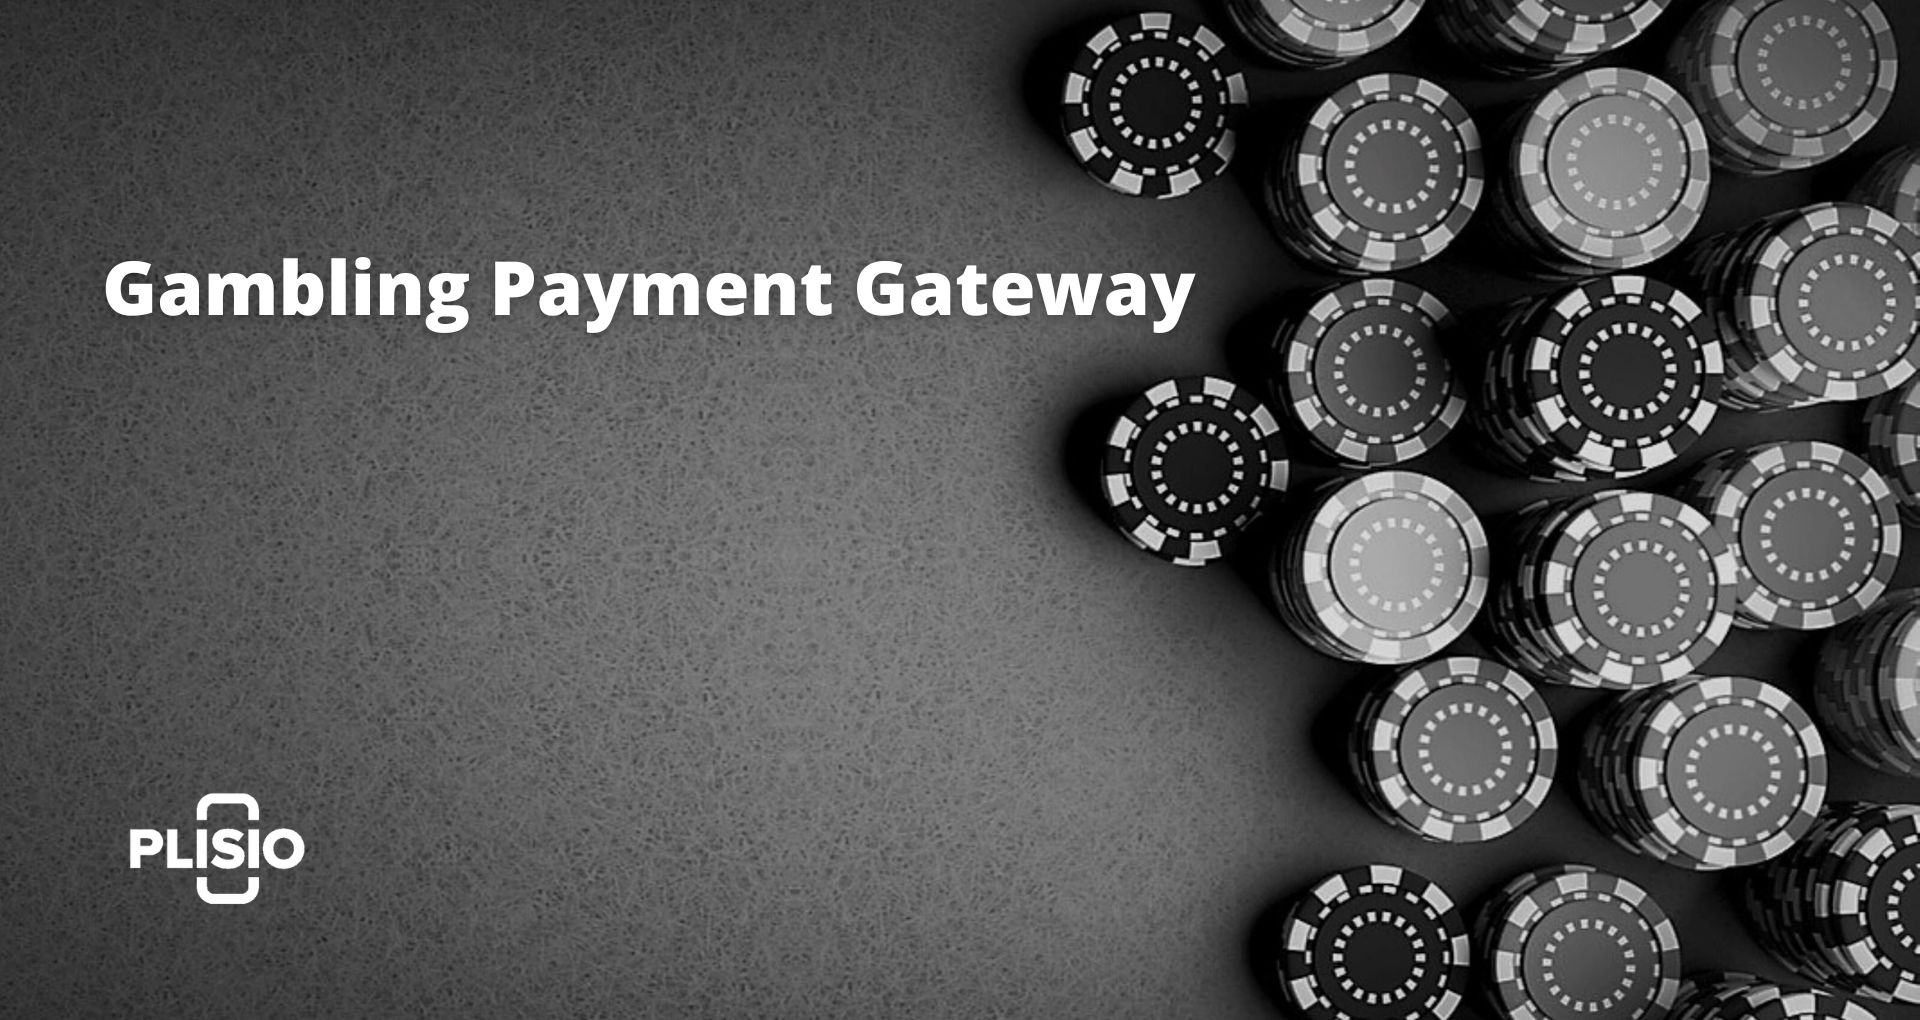 Gambling Payment Gateway: The Rise of Cryptocurrency in the Casino...